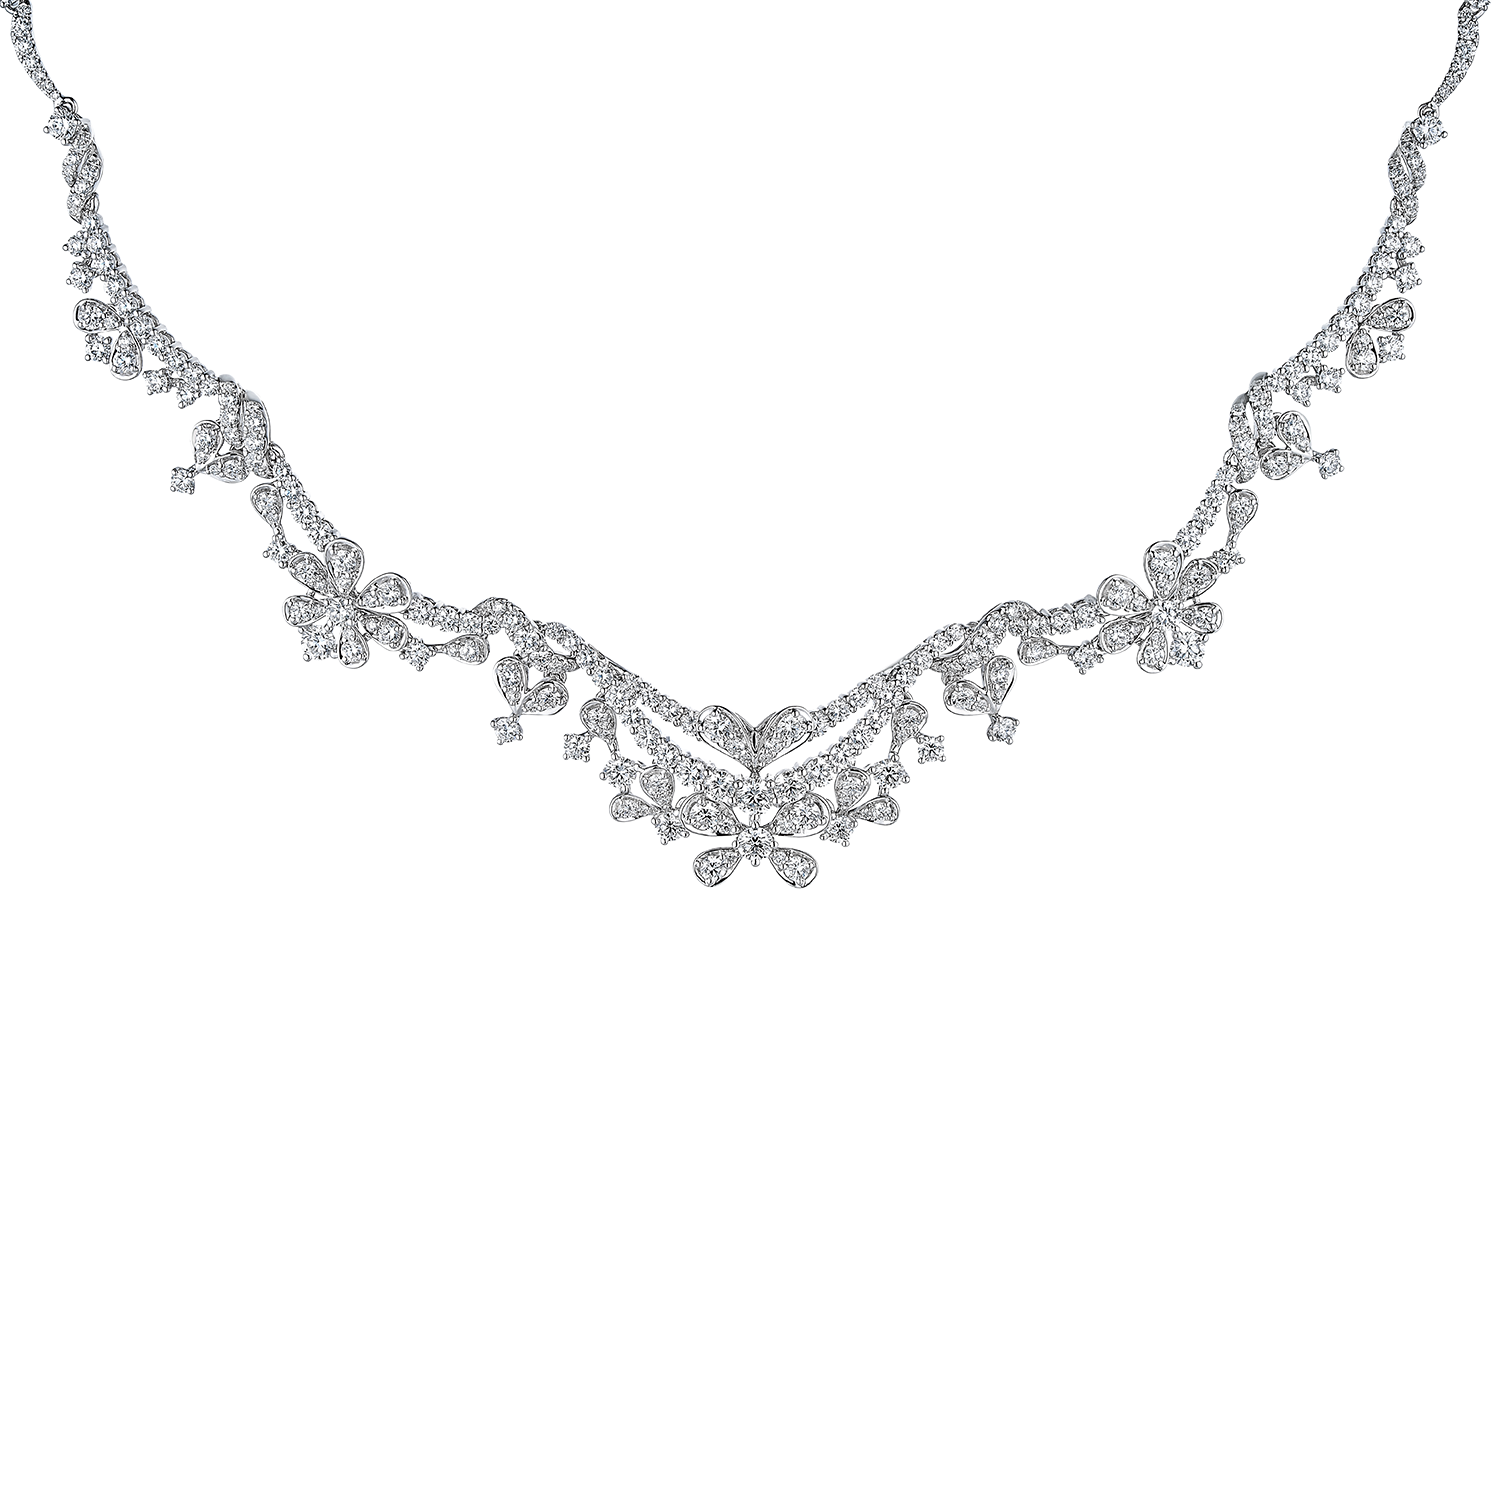 Wedding Collection "Shining Moment" 18K Gold Diamond Necklace